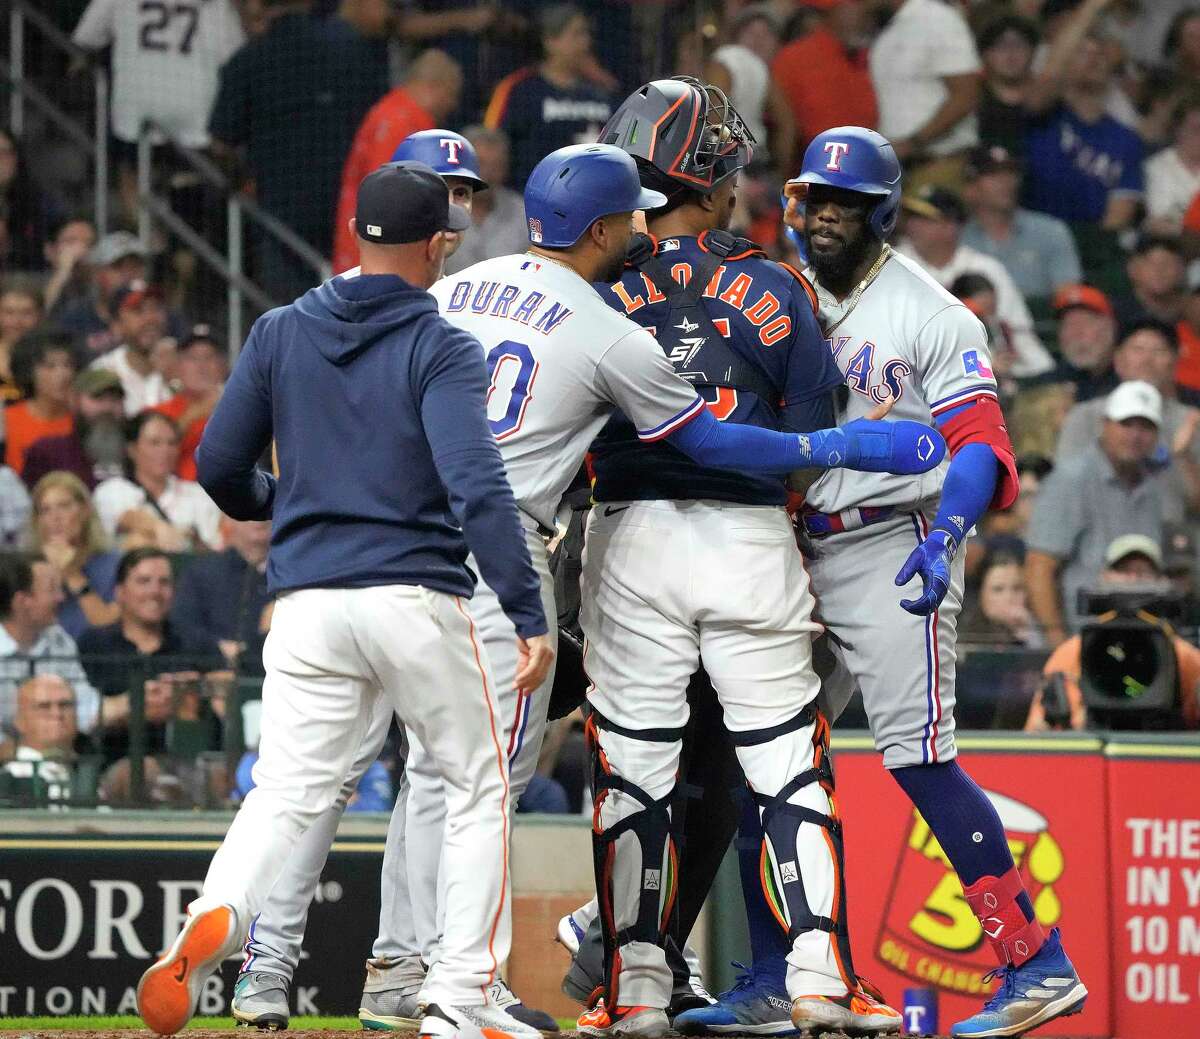 Houston Astros: Texas Rangers avoid sweep with blowout in chippy game